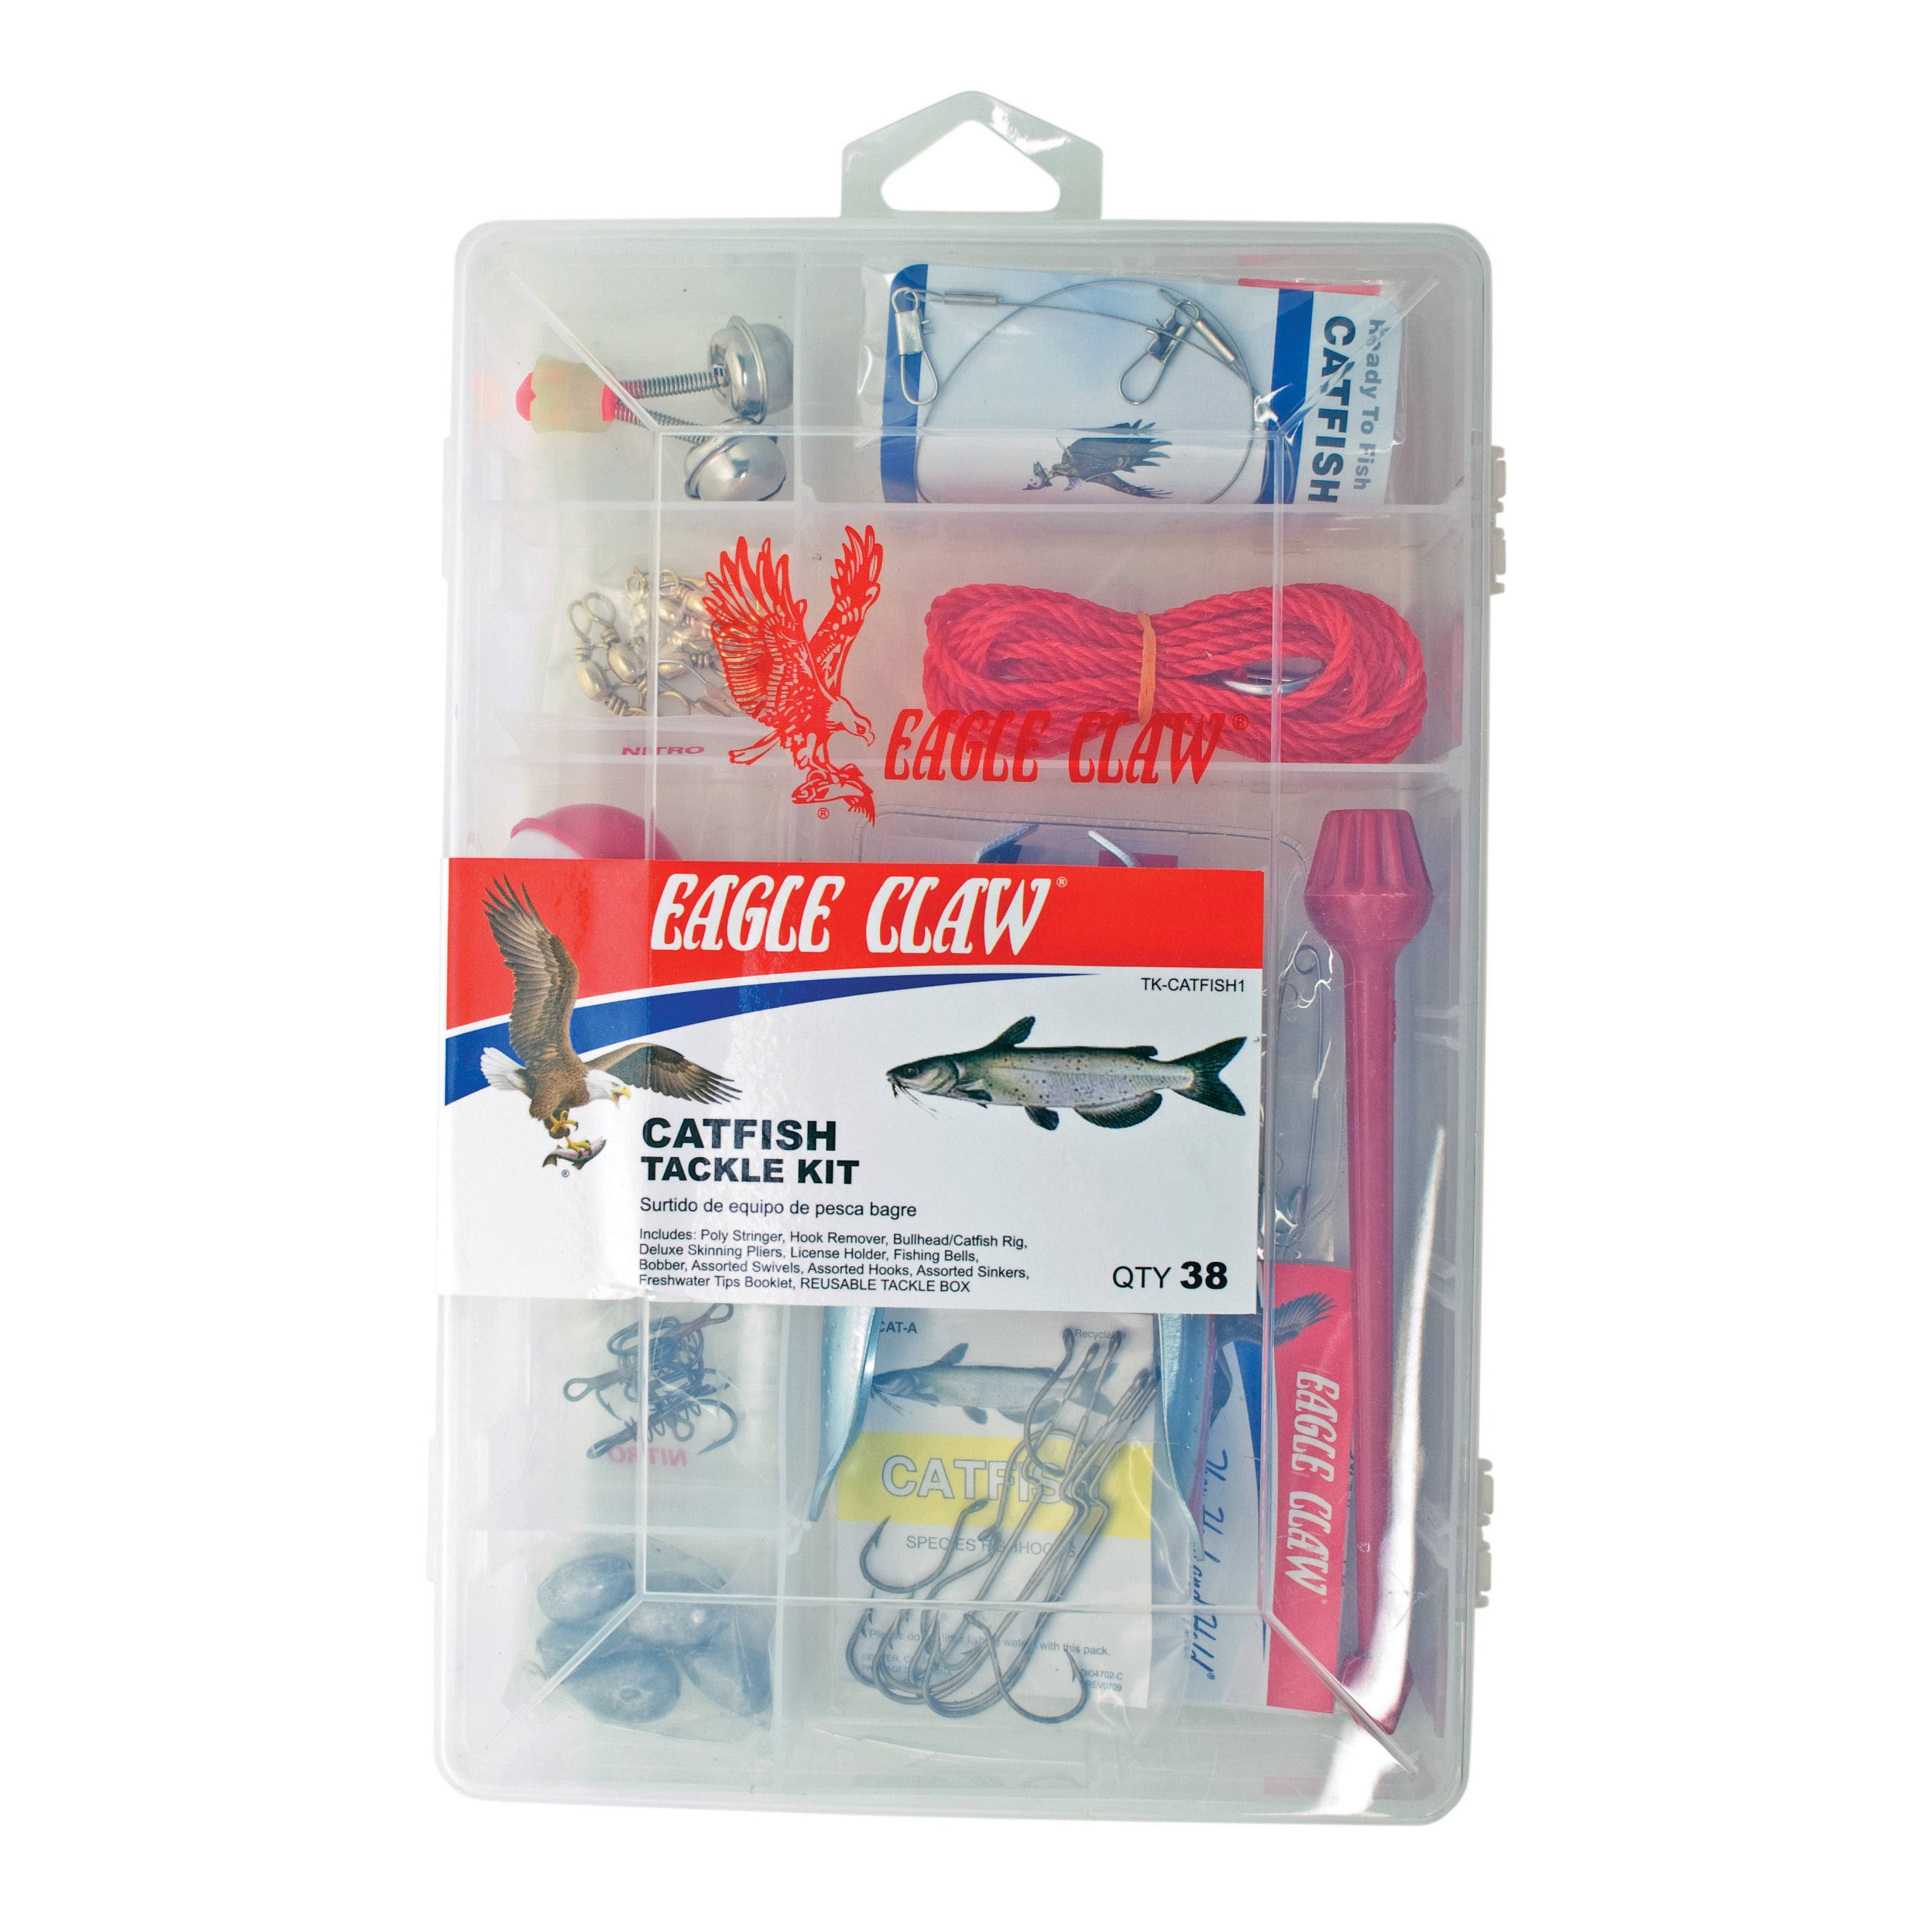 Eagle Claw Catfish Tackle Kit - 38-Pack